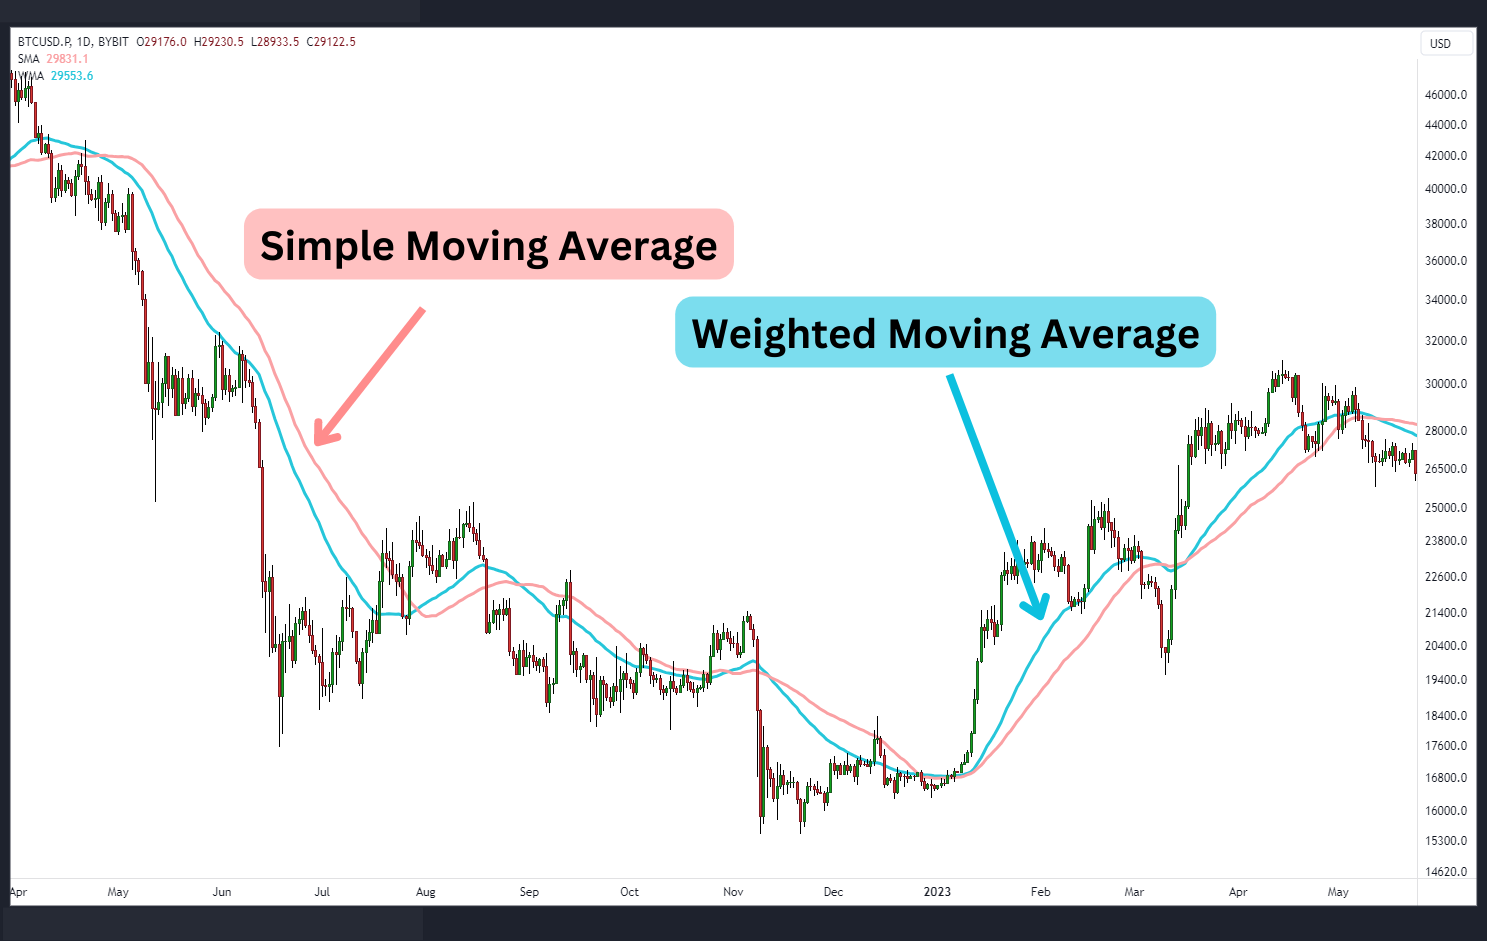 Weighted Moving Average (WMA) vs. Simple Moving Average (SMA)